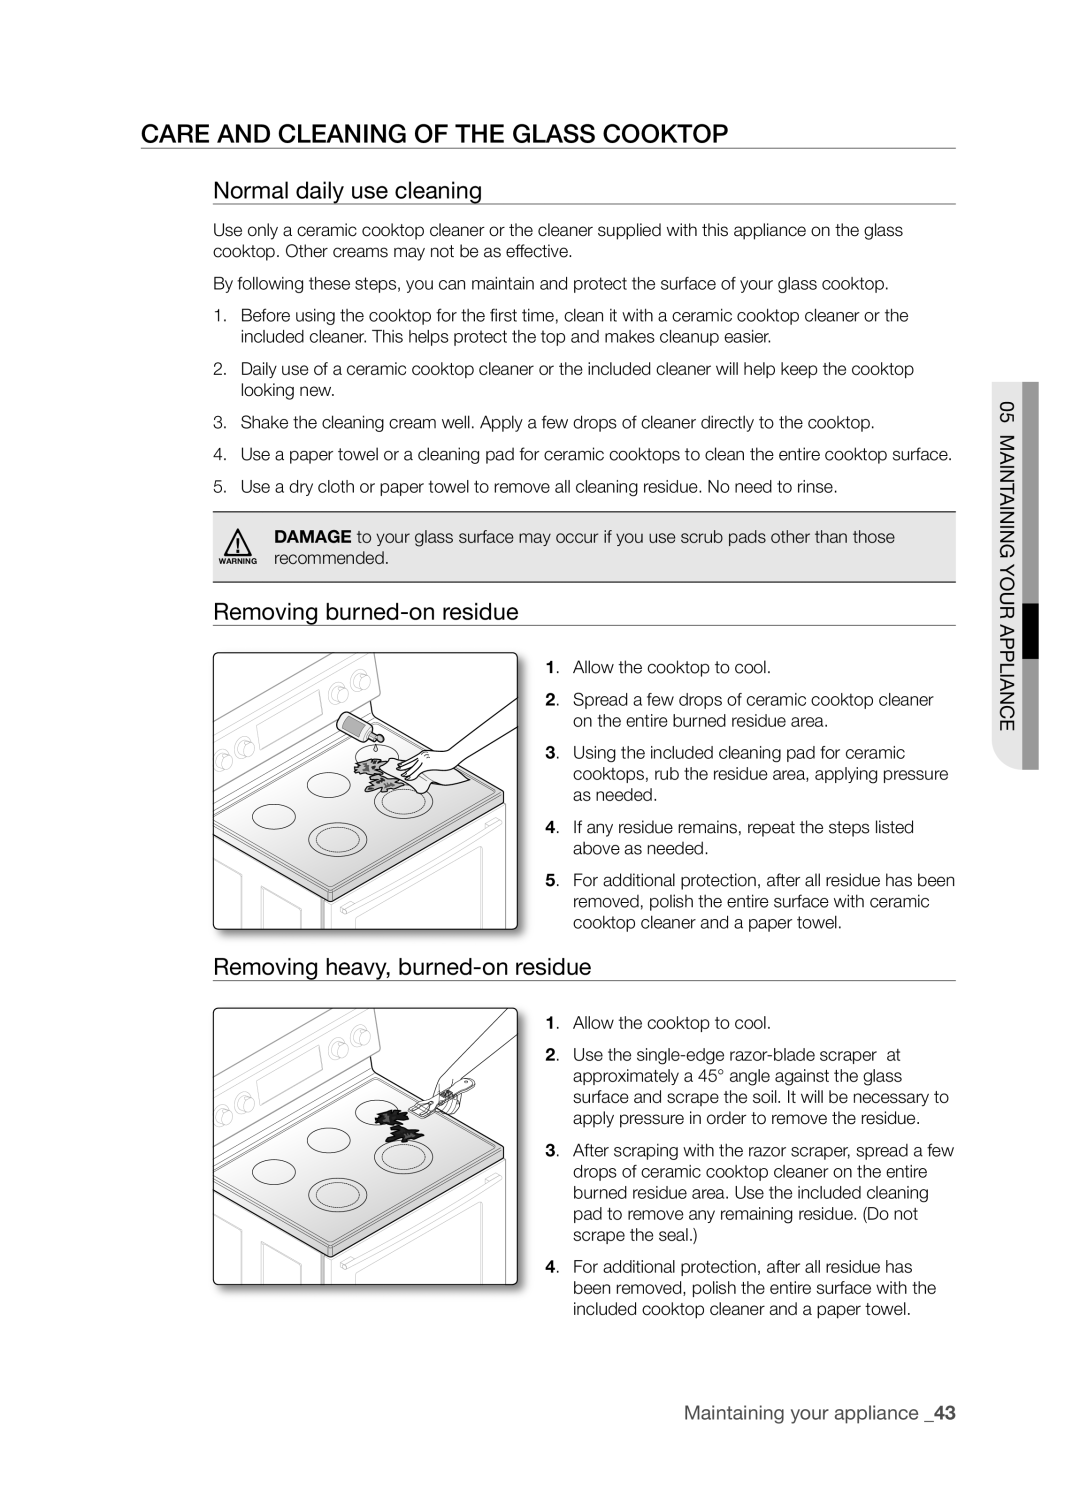 Samsung FTQ352IWUW user manual Care And Cleaning Of The Glass Cooktop, Normal daily use cleaning, Removing burned-onresidue 